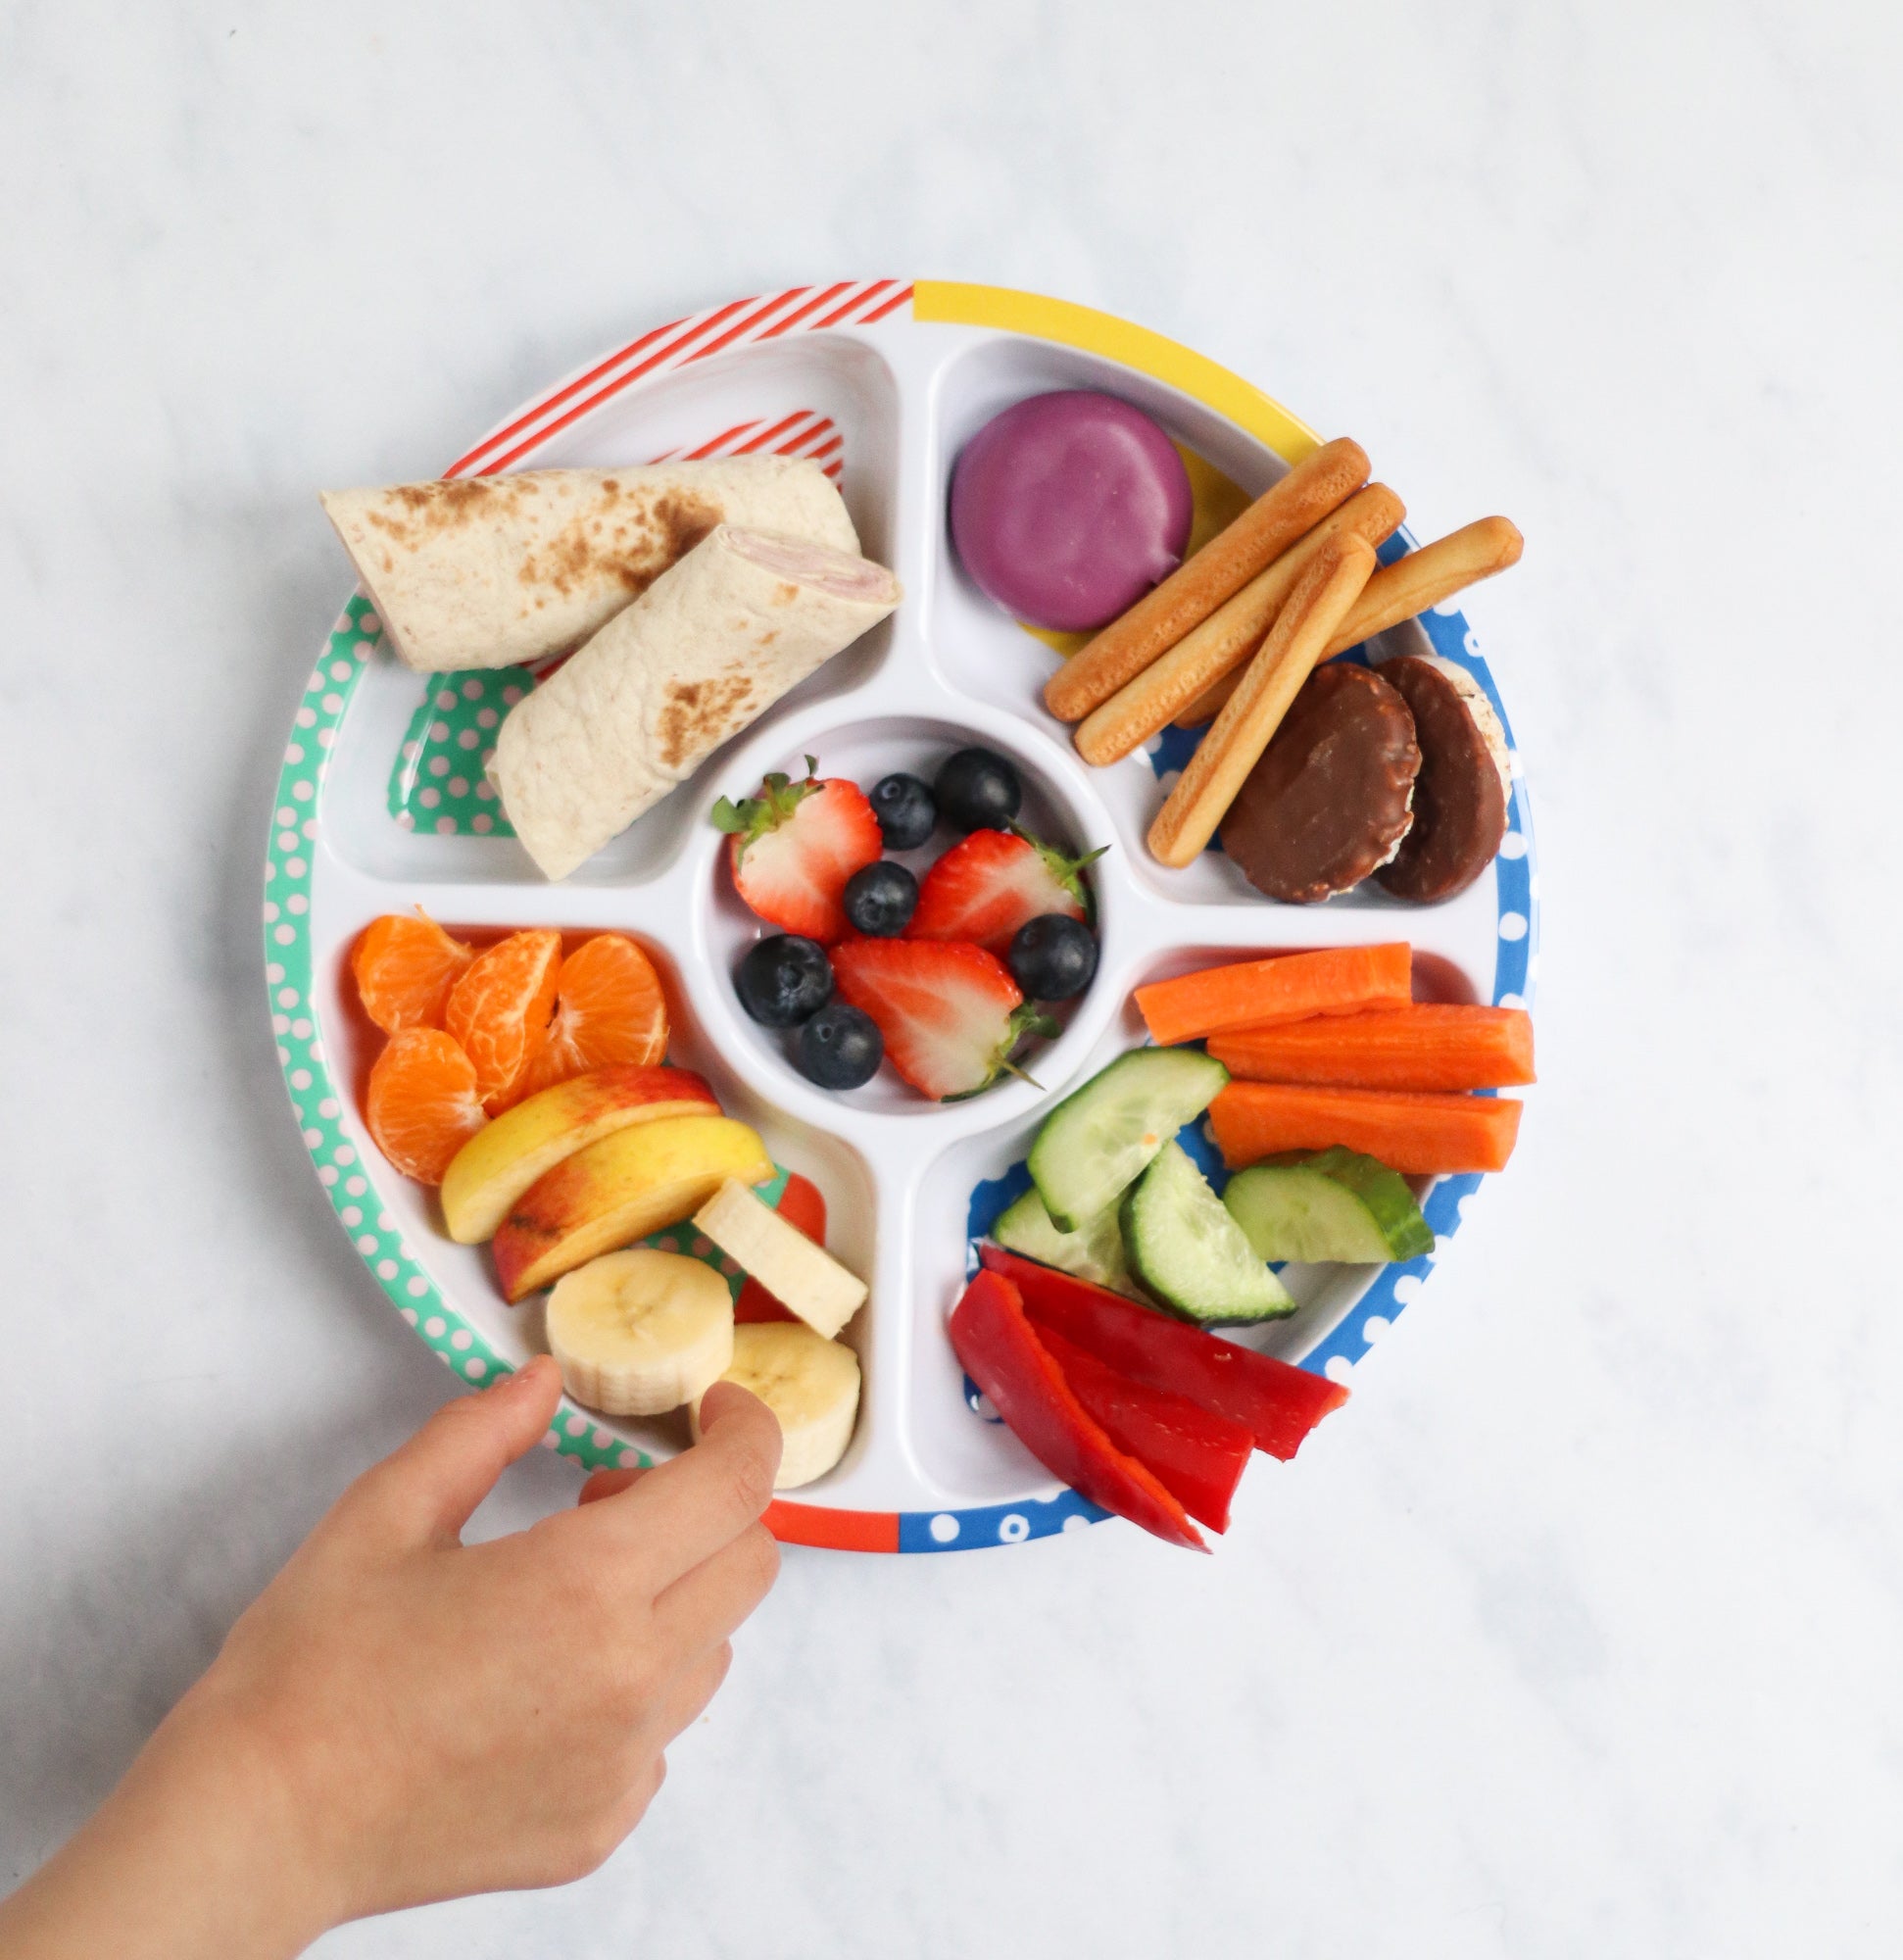 The Pick Plate Midi being used as a fun food plate for fussy eaters with a variety of healthy snacks in the divided compartments.